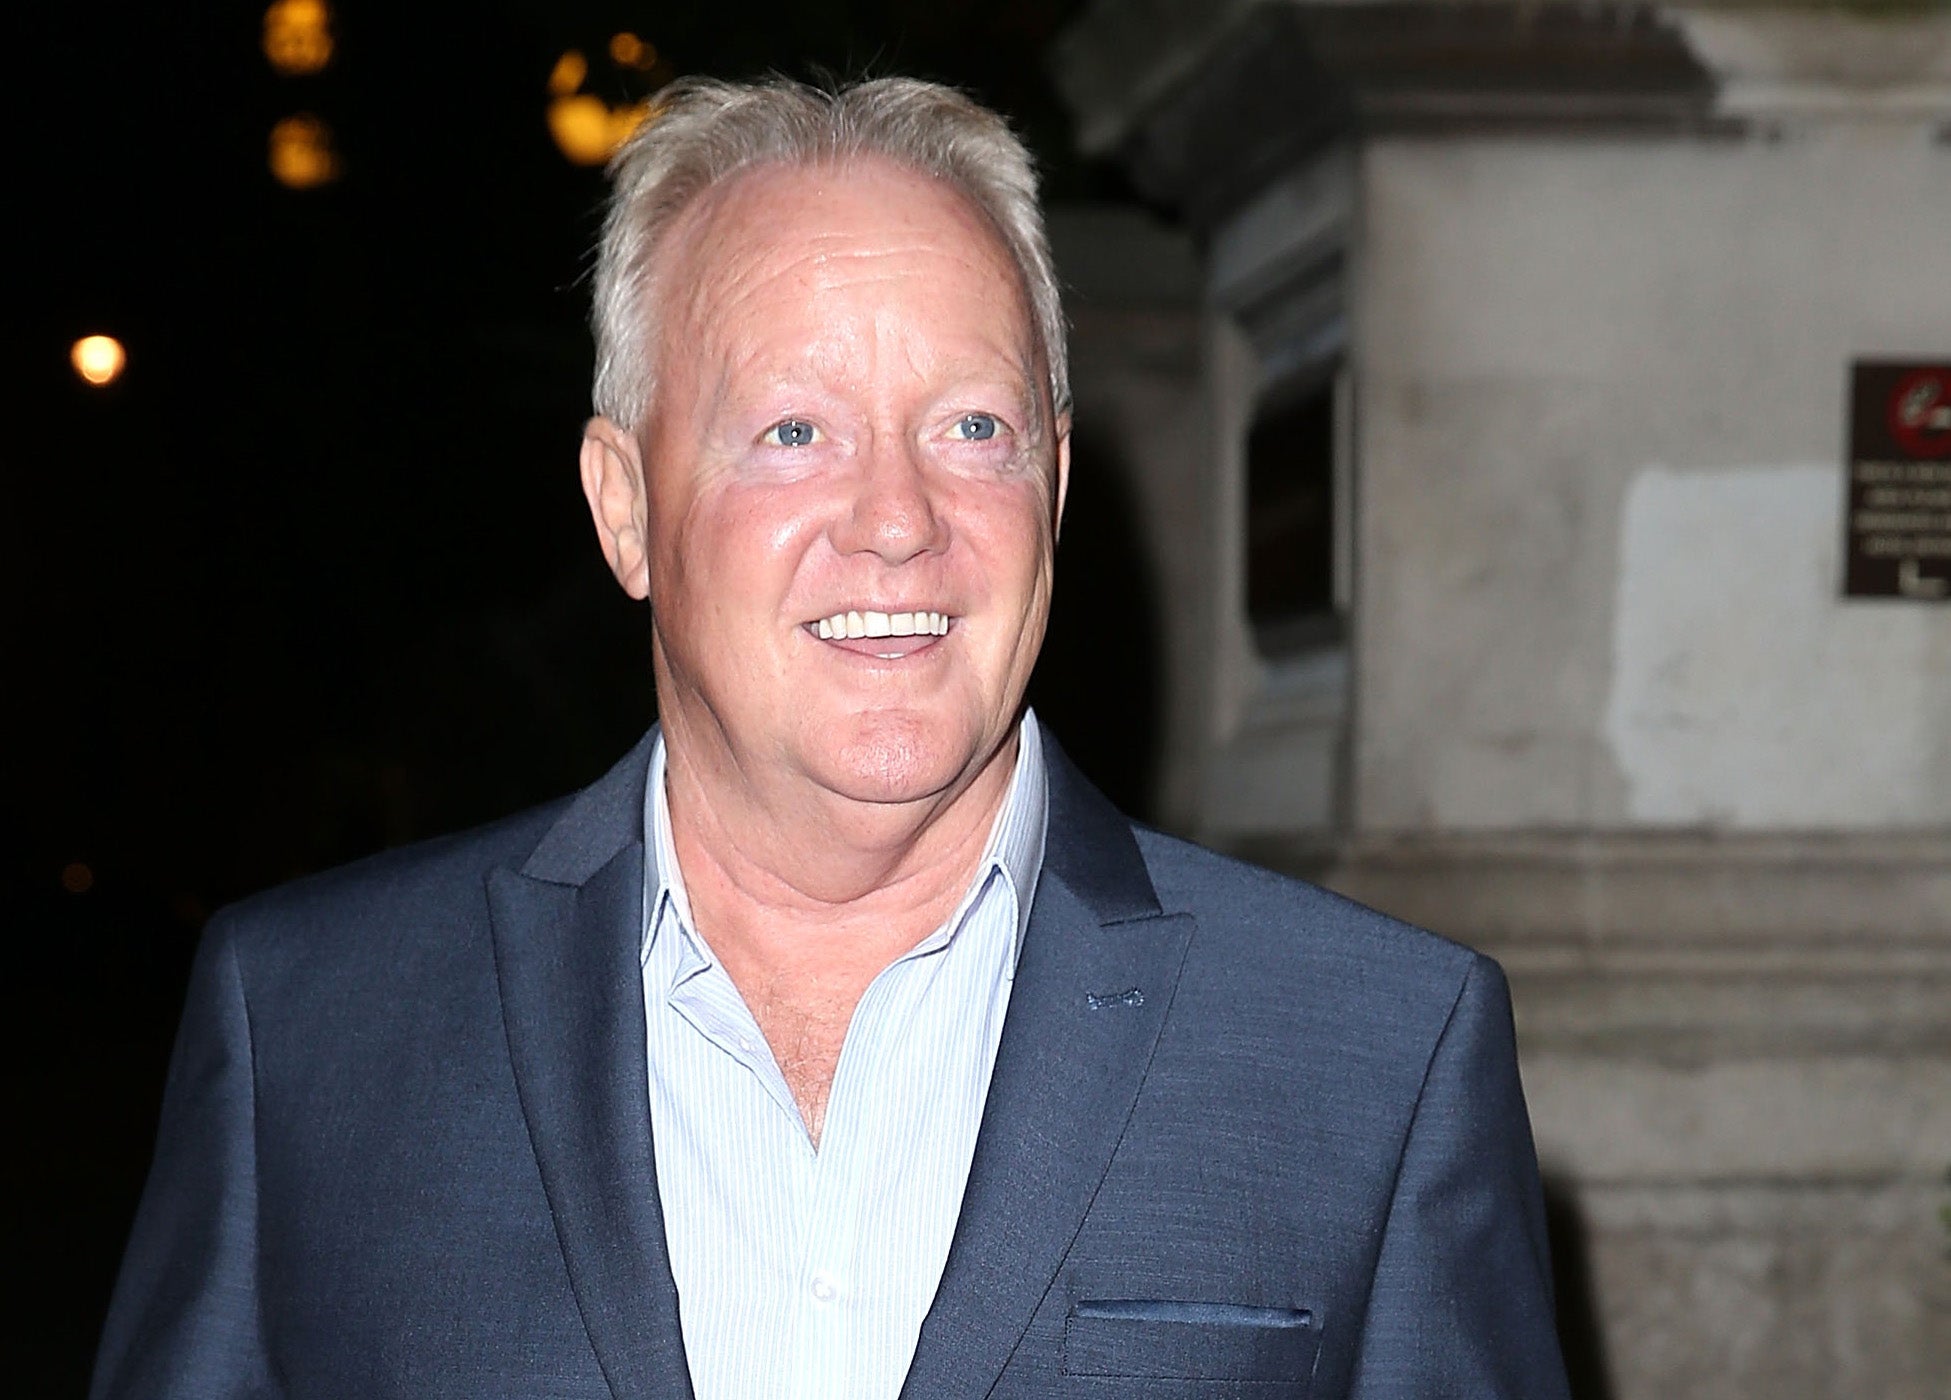 Keith Chegwin is the bookies' favourite to win CBB